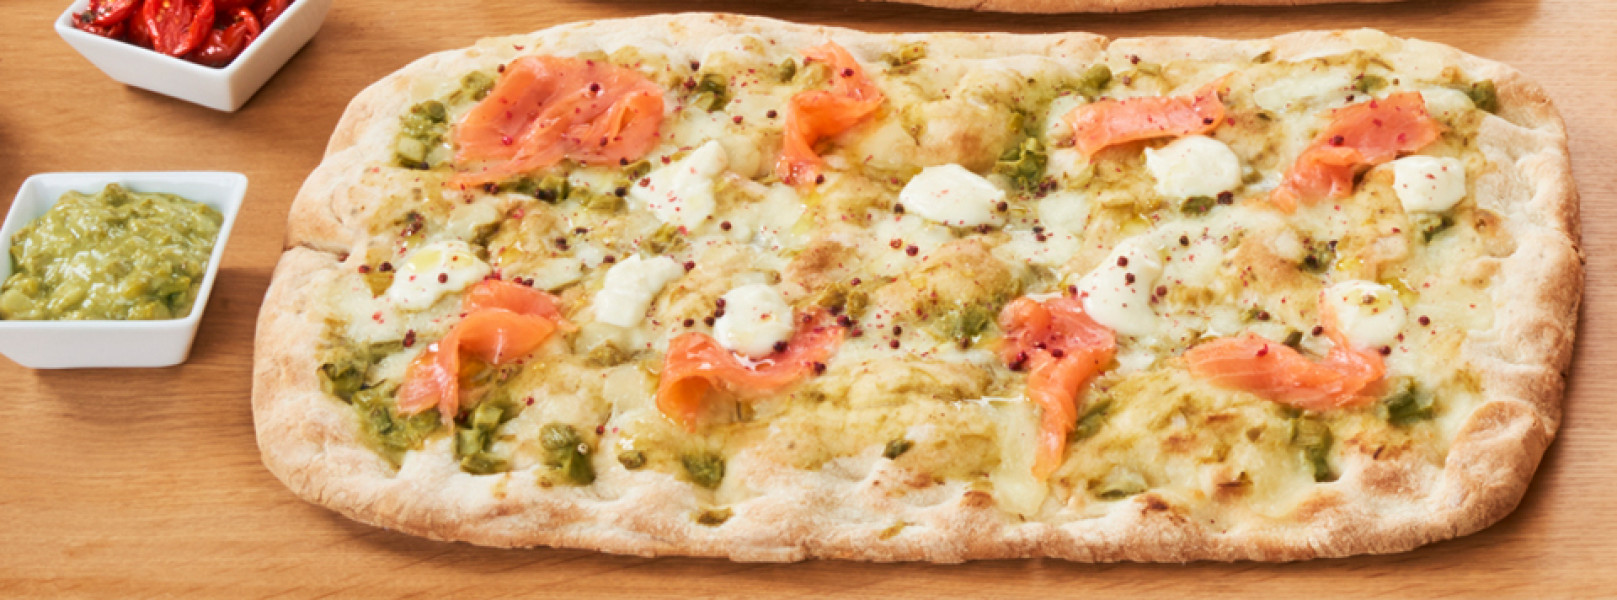 PIZZA WITH ASPARAGUS, SALMON AND PINK PEPPER